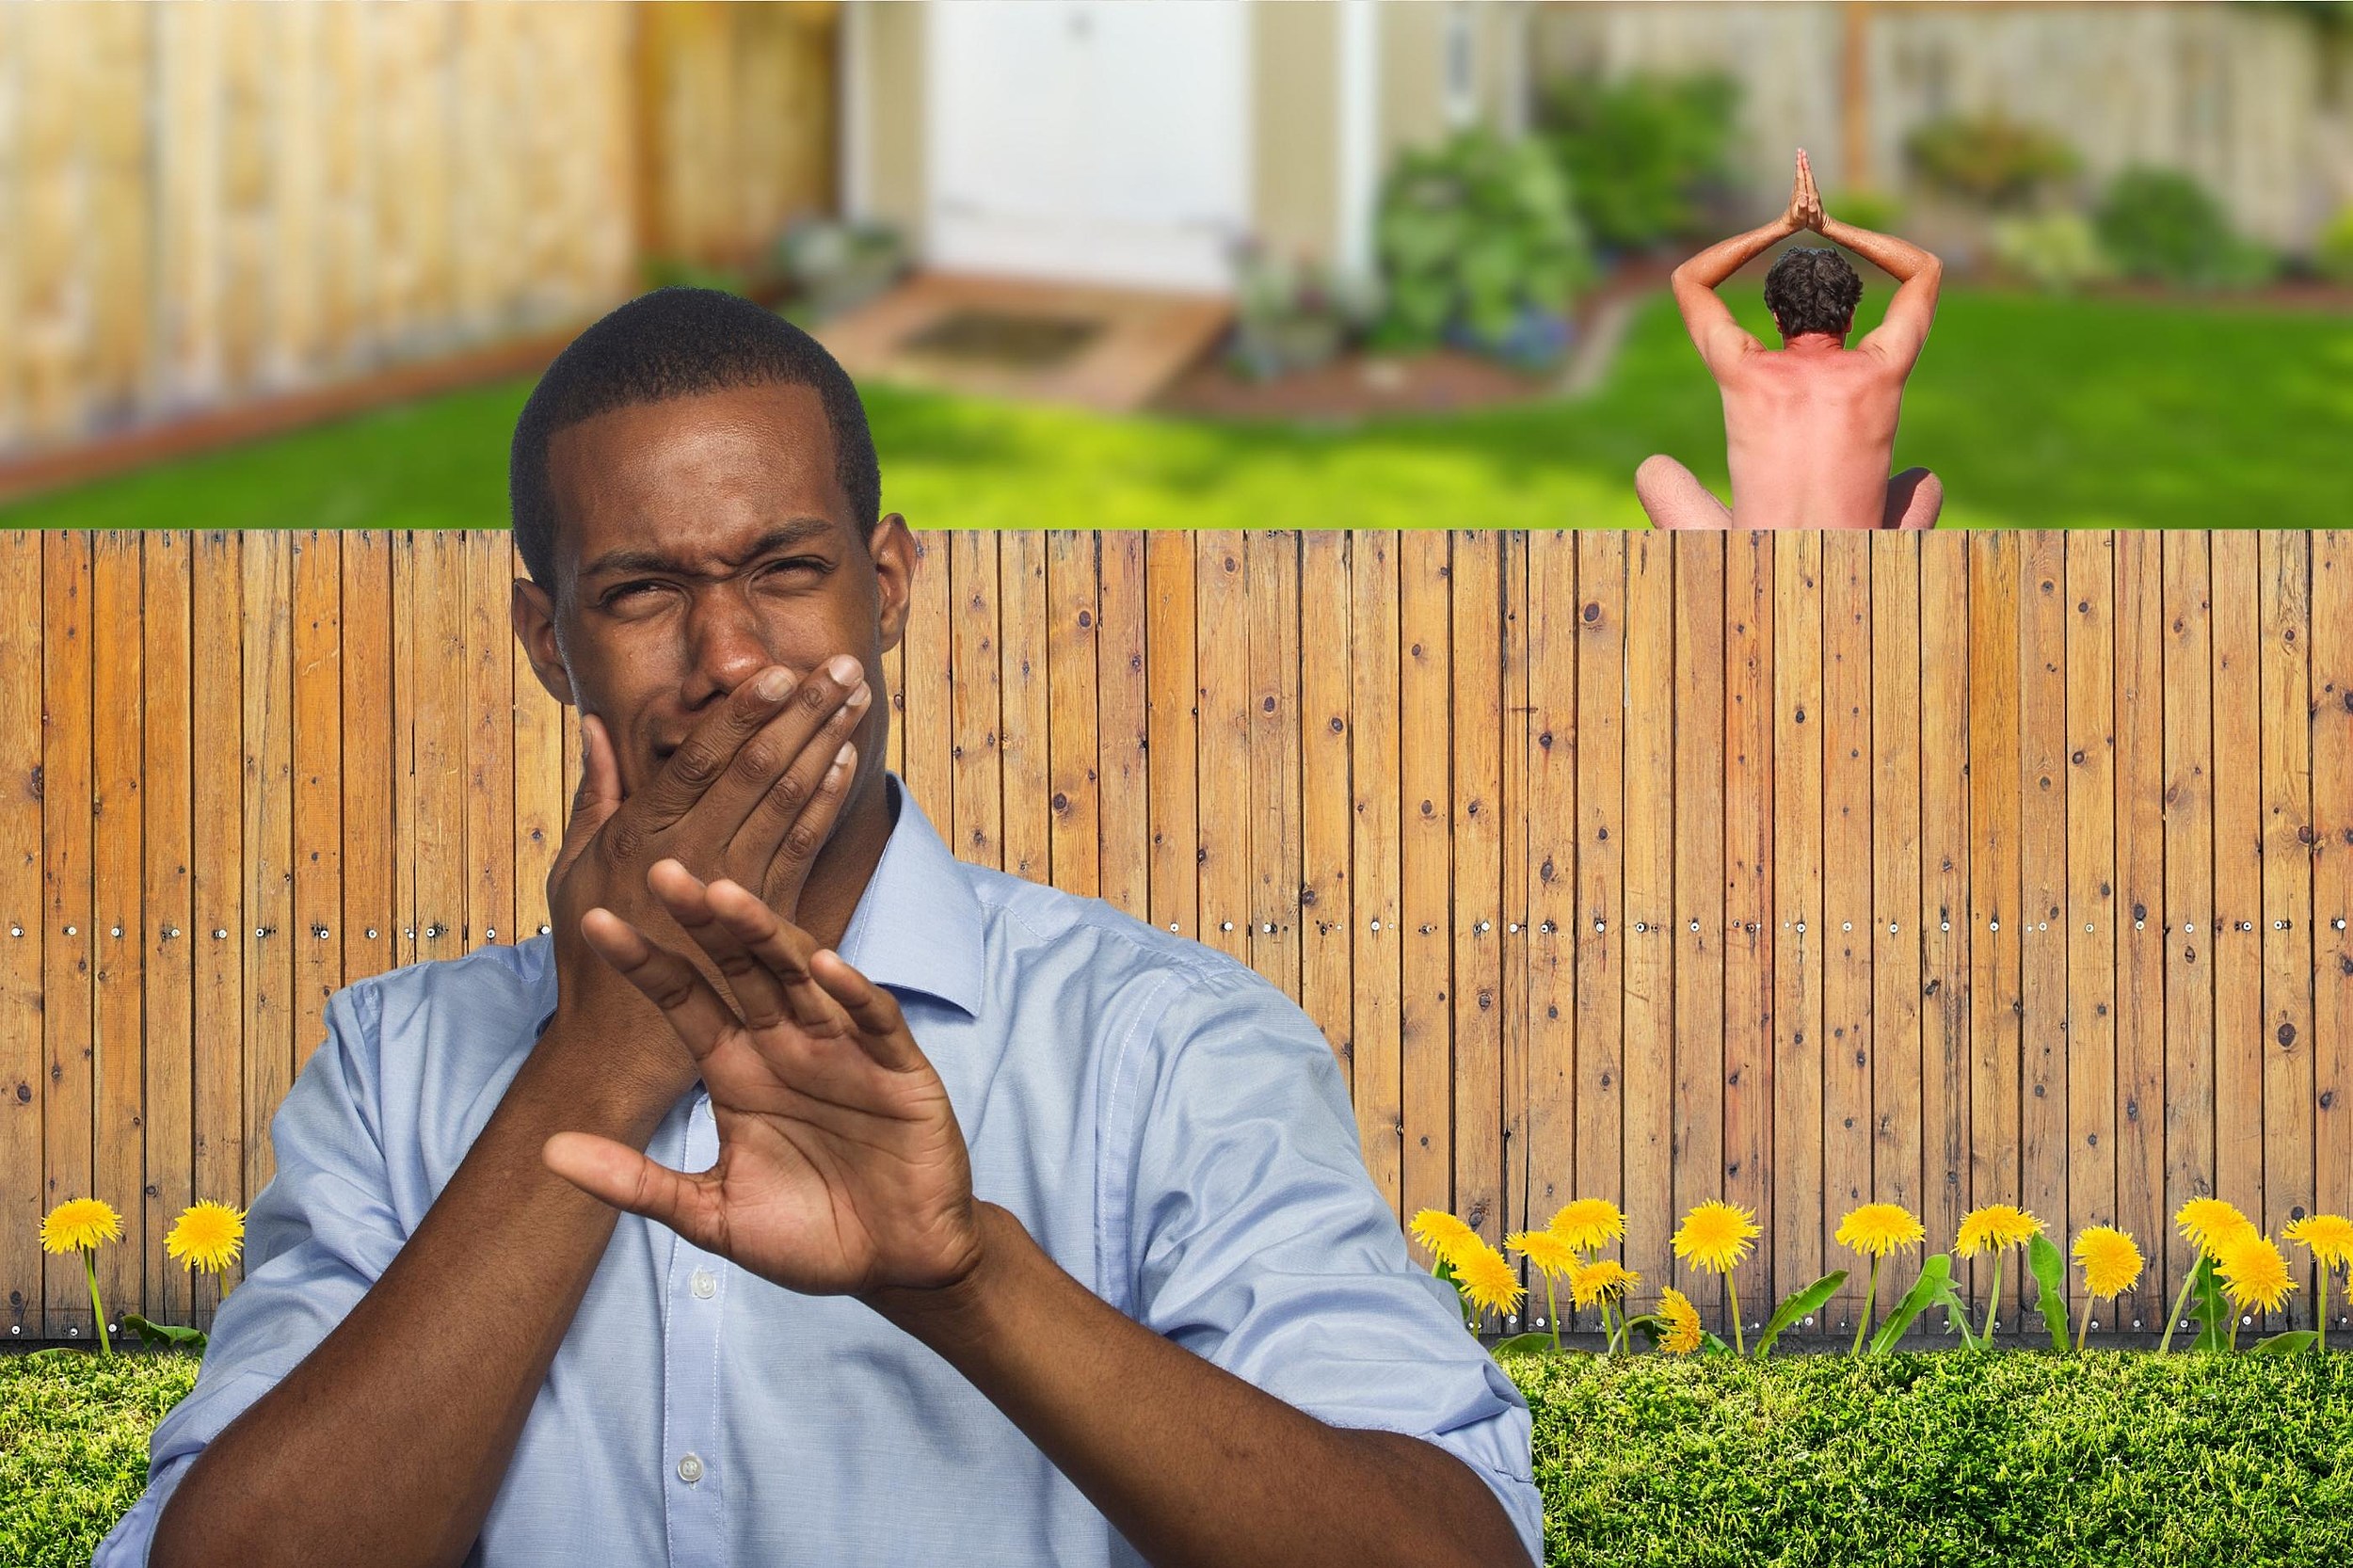 It Is Legal To Be Naked In Your Own Backyard In Illinois? pic